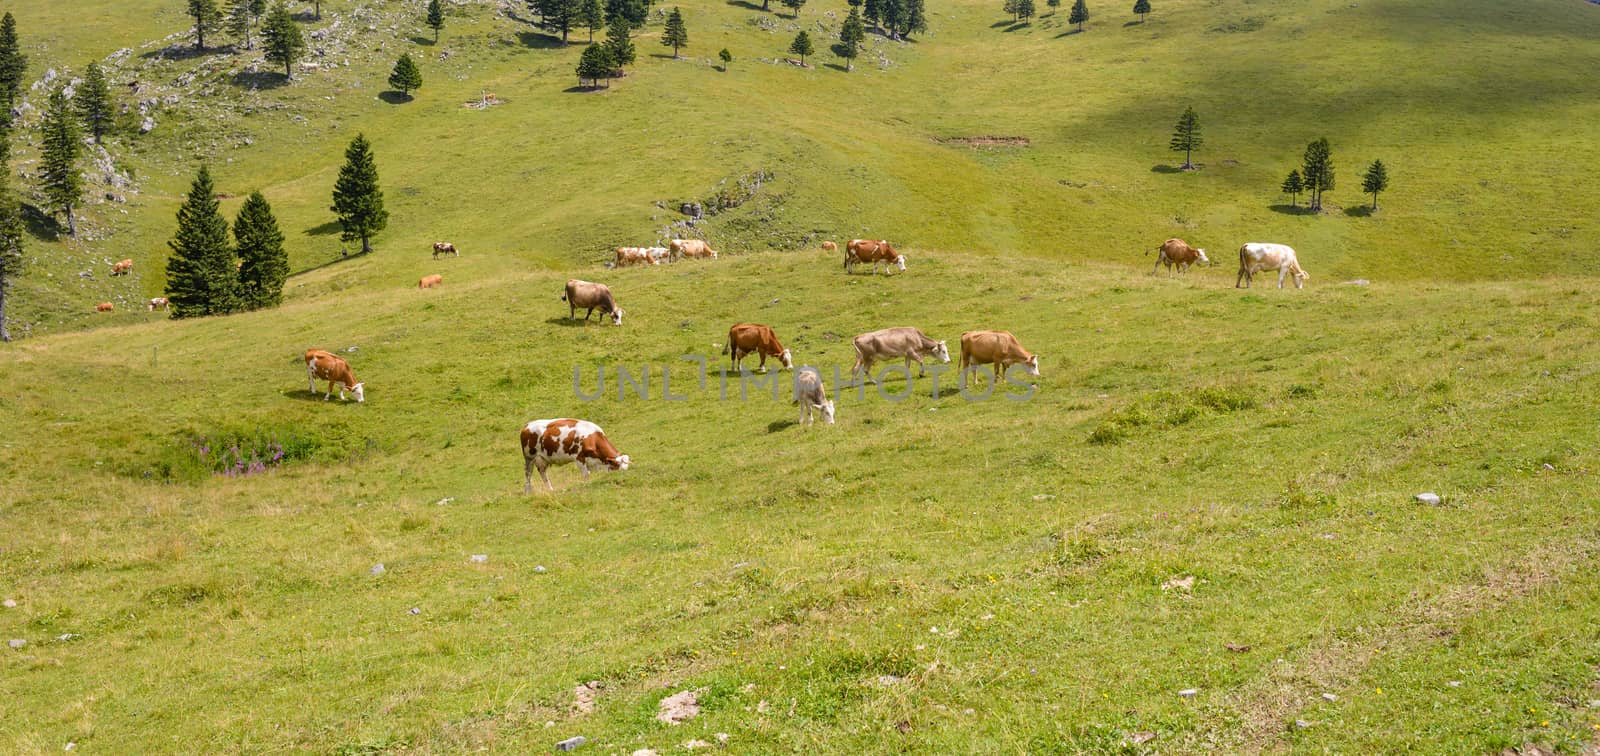 Cattle, Livestock grazing on pasture in mountains by asafaric